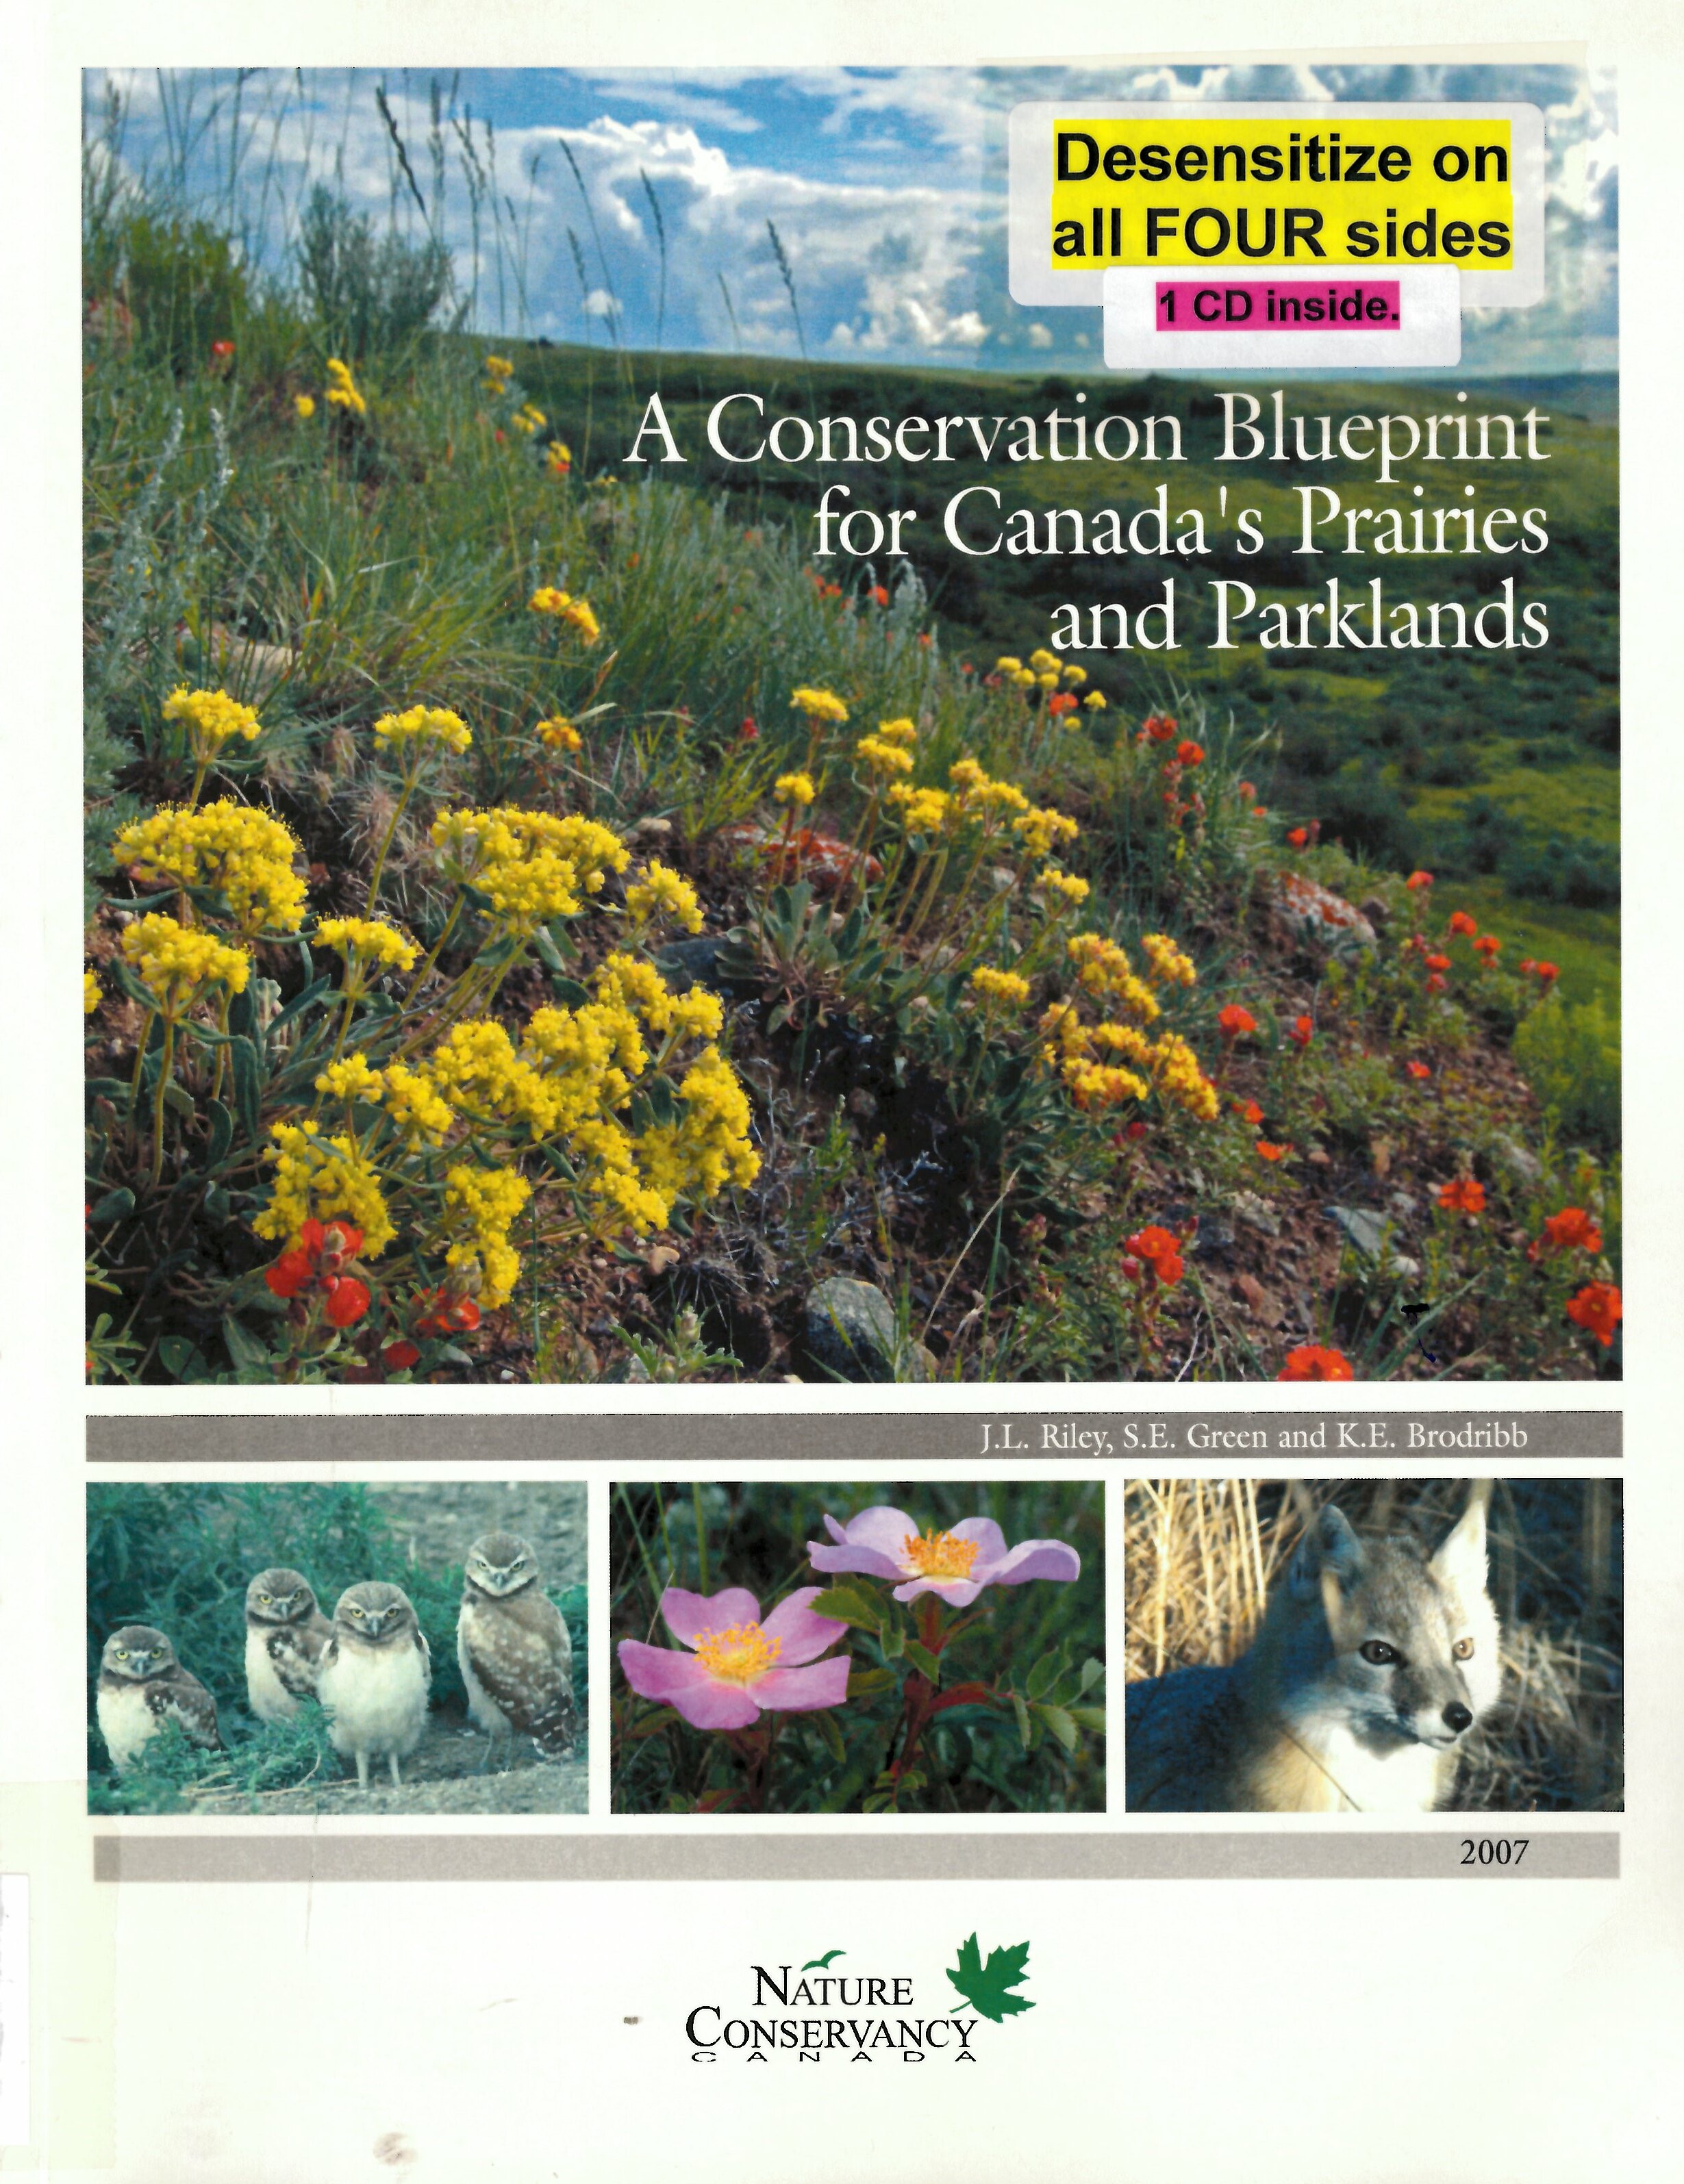 A conservation blueprint for Canada's prairies and parklands